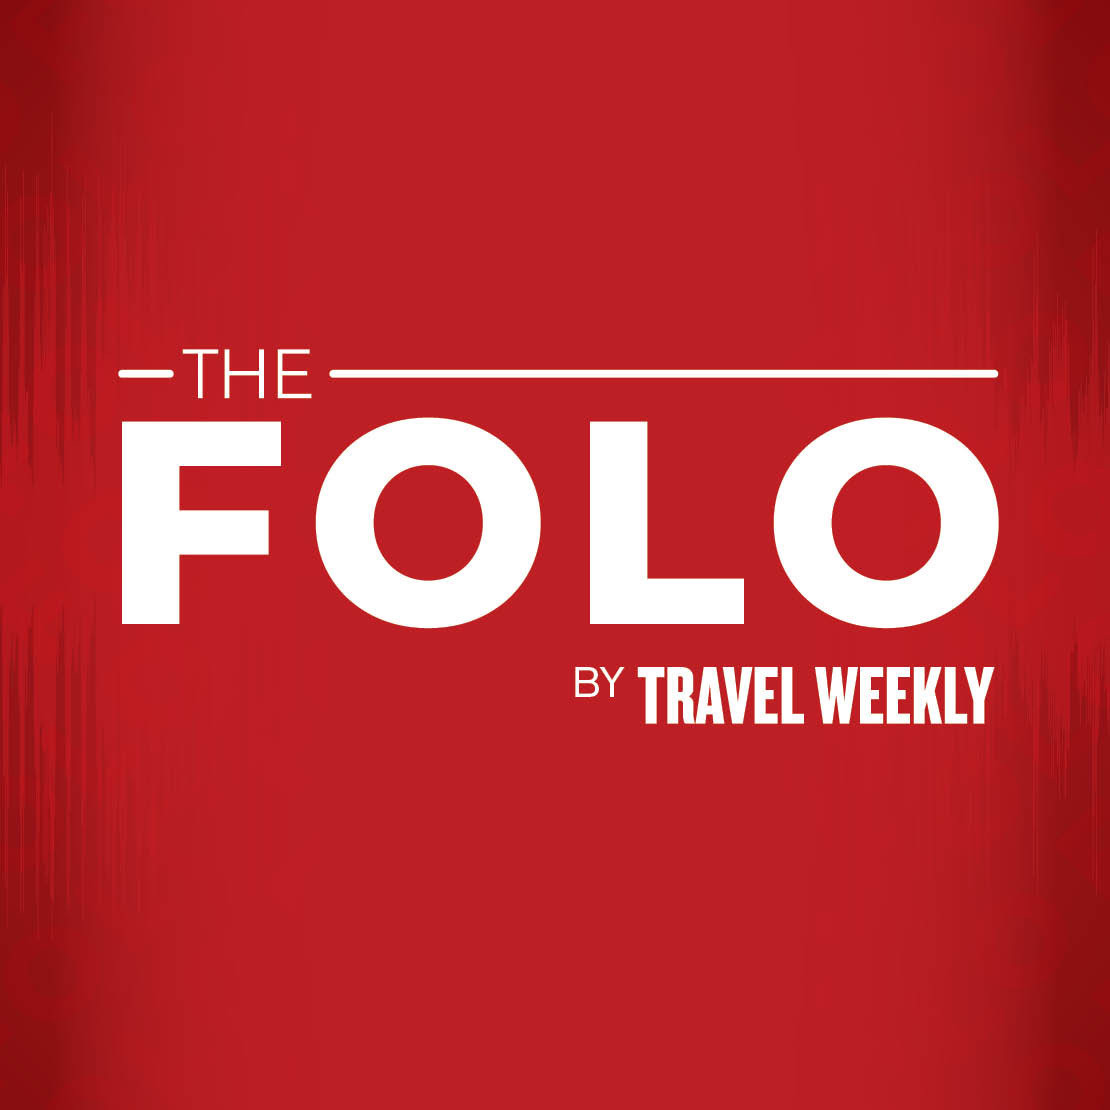 Best of the Folo: The solo cruising trend